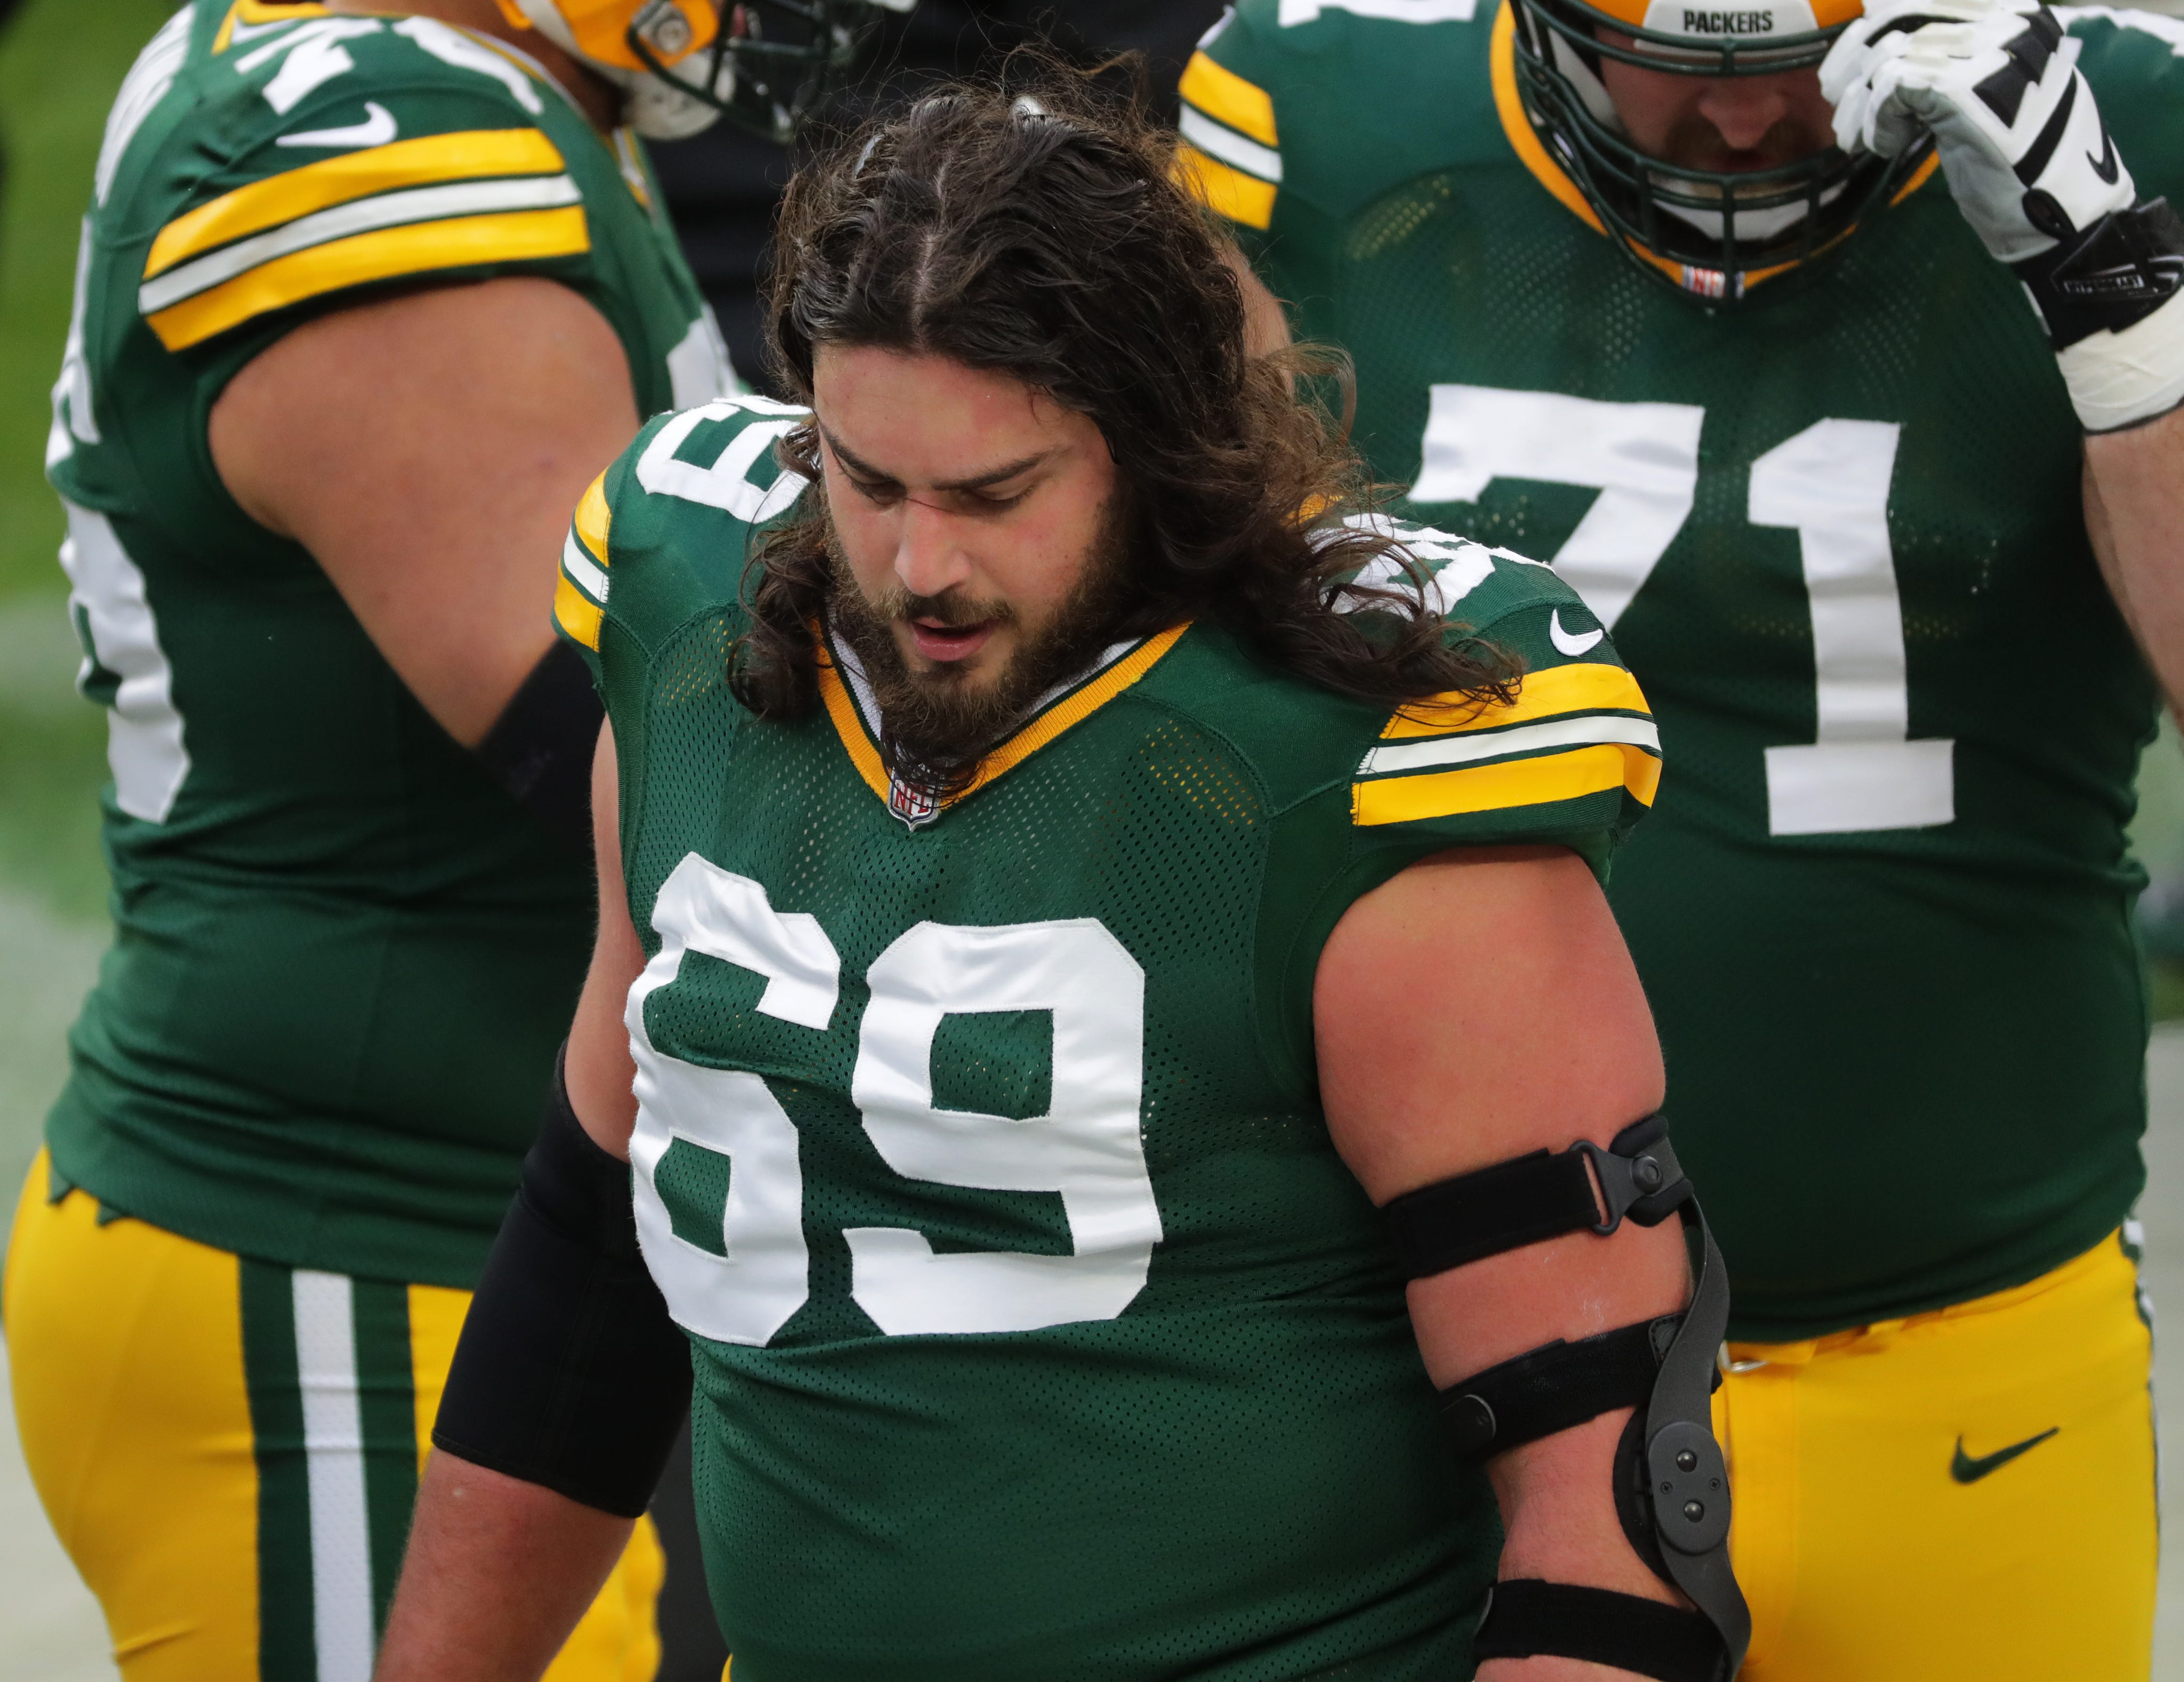 Green Bay Packers offensive tackle David Bakhtiari (69) comes off the field on fourth down during the second quarter of their game against the Jacksonville Jaguars at Lambeau Field in Green Bay, Wis.